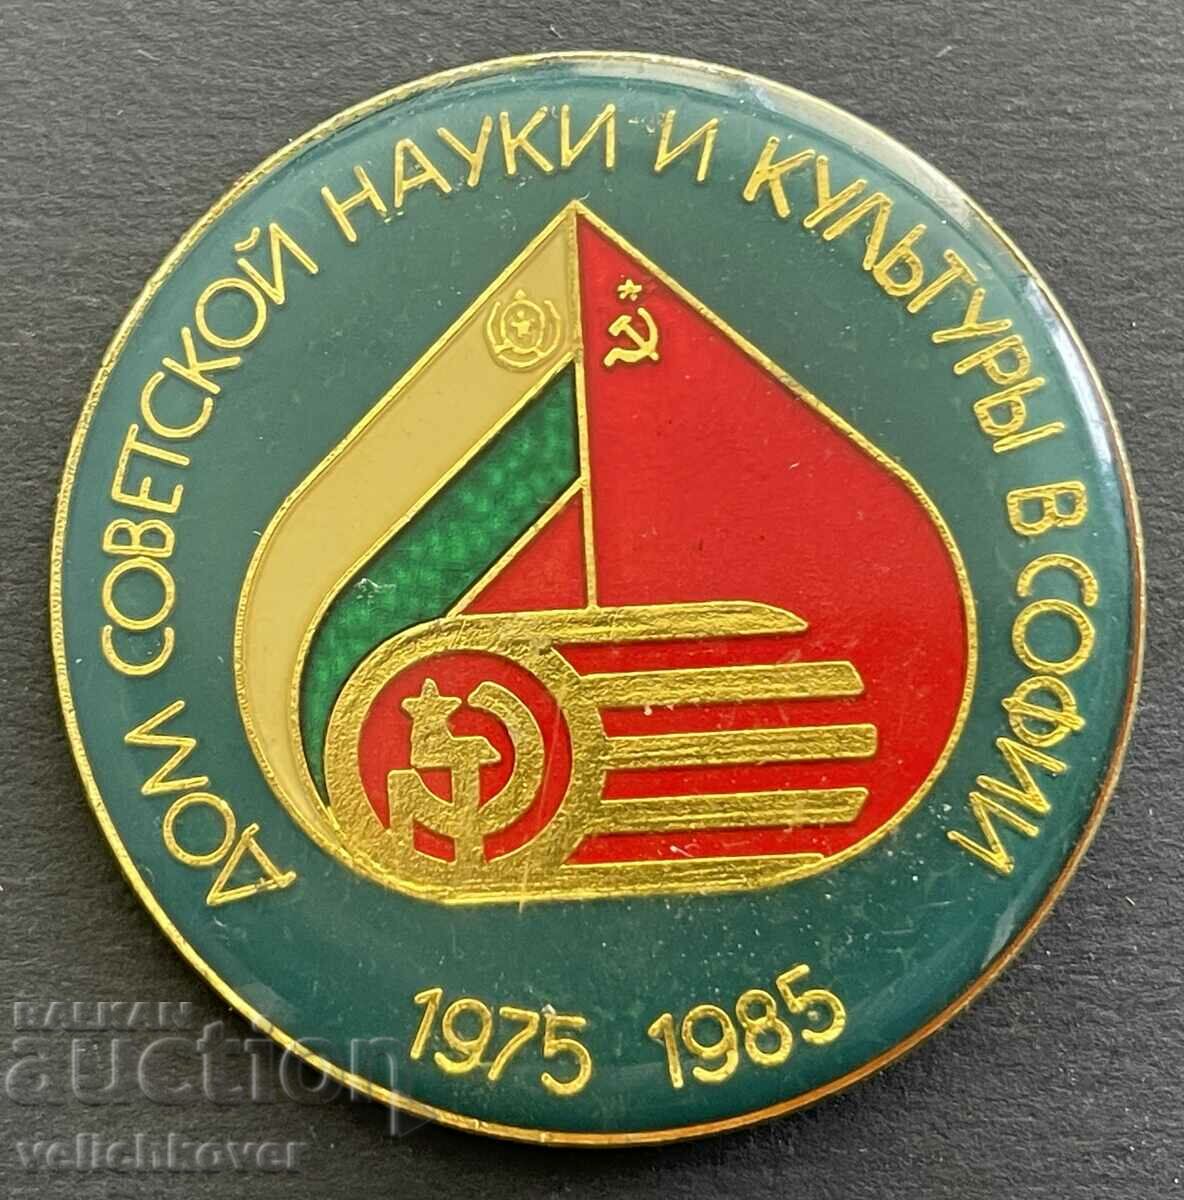 37262 Bulgaria sign 10 years. House of Soviet Science and Culture